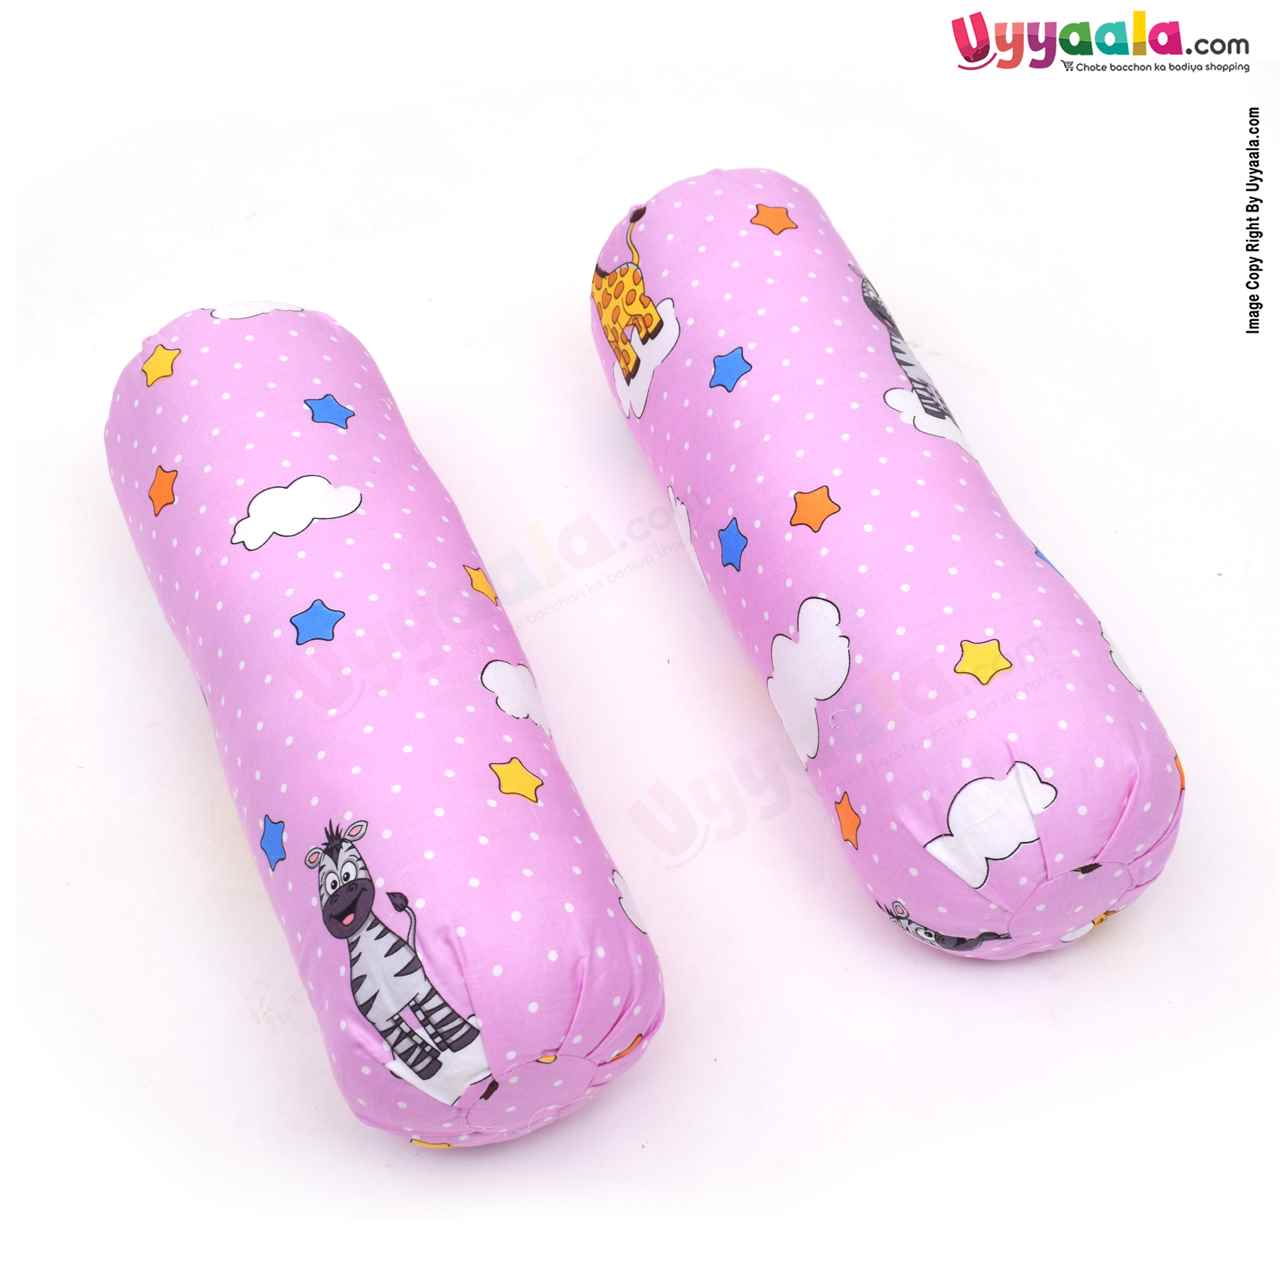 Baby Soft Cotton Bolster Pillows With Stars & Clouds Print, 1 pair - Baby Pink 0-12m